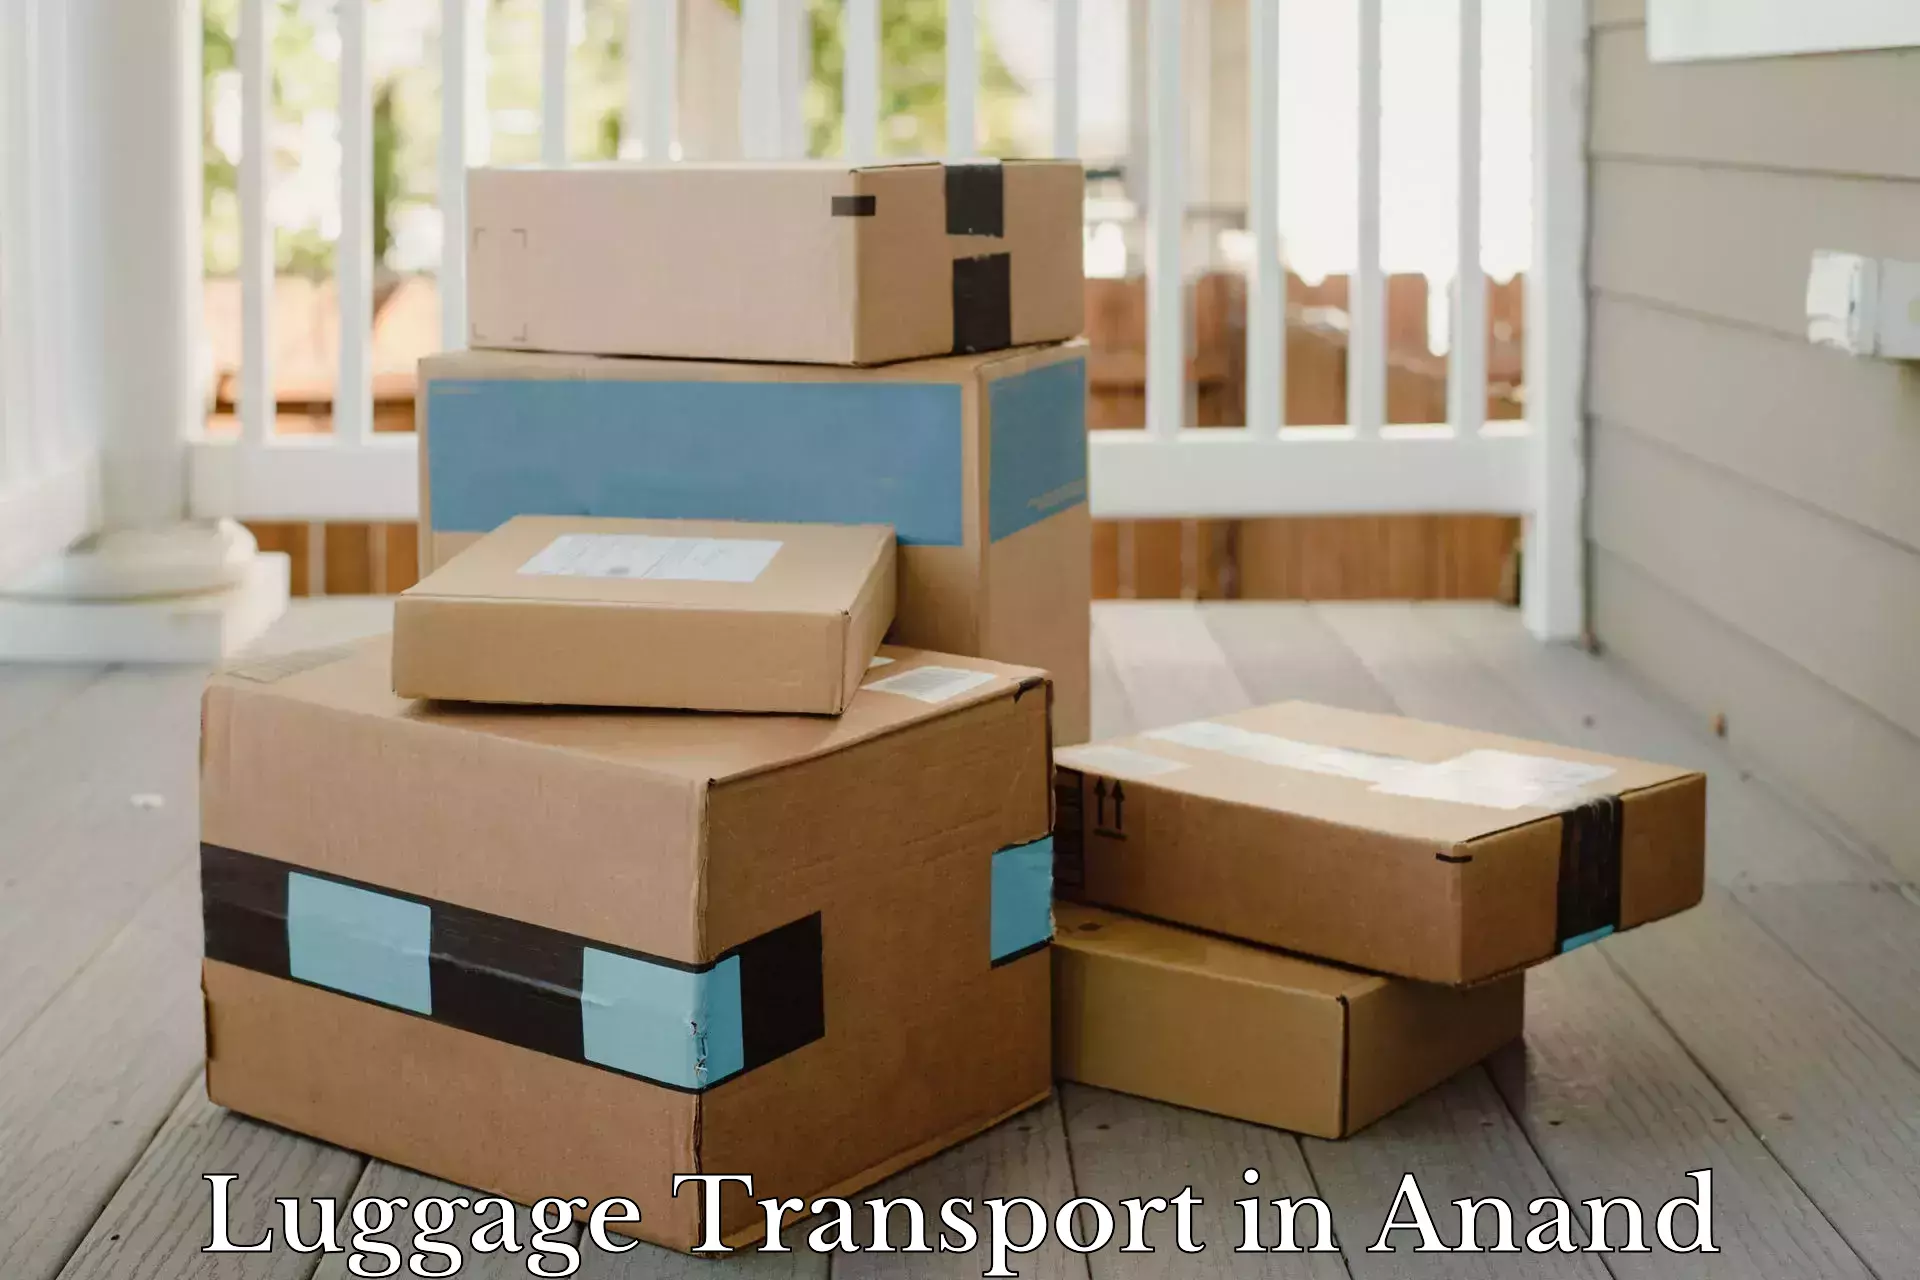 Baggage transport coordination in Anand